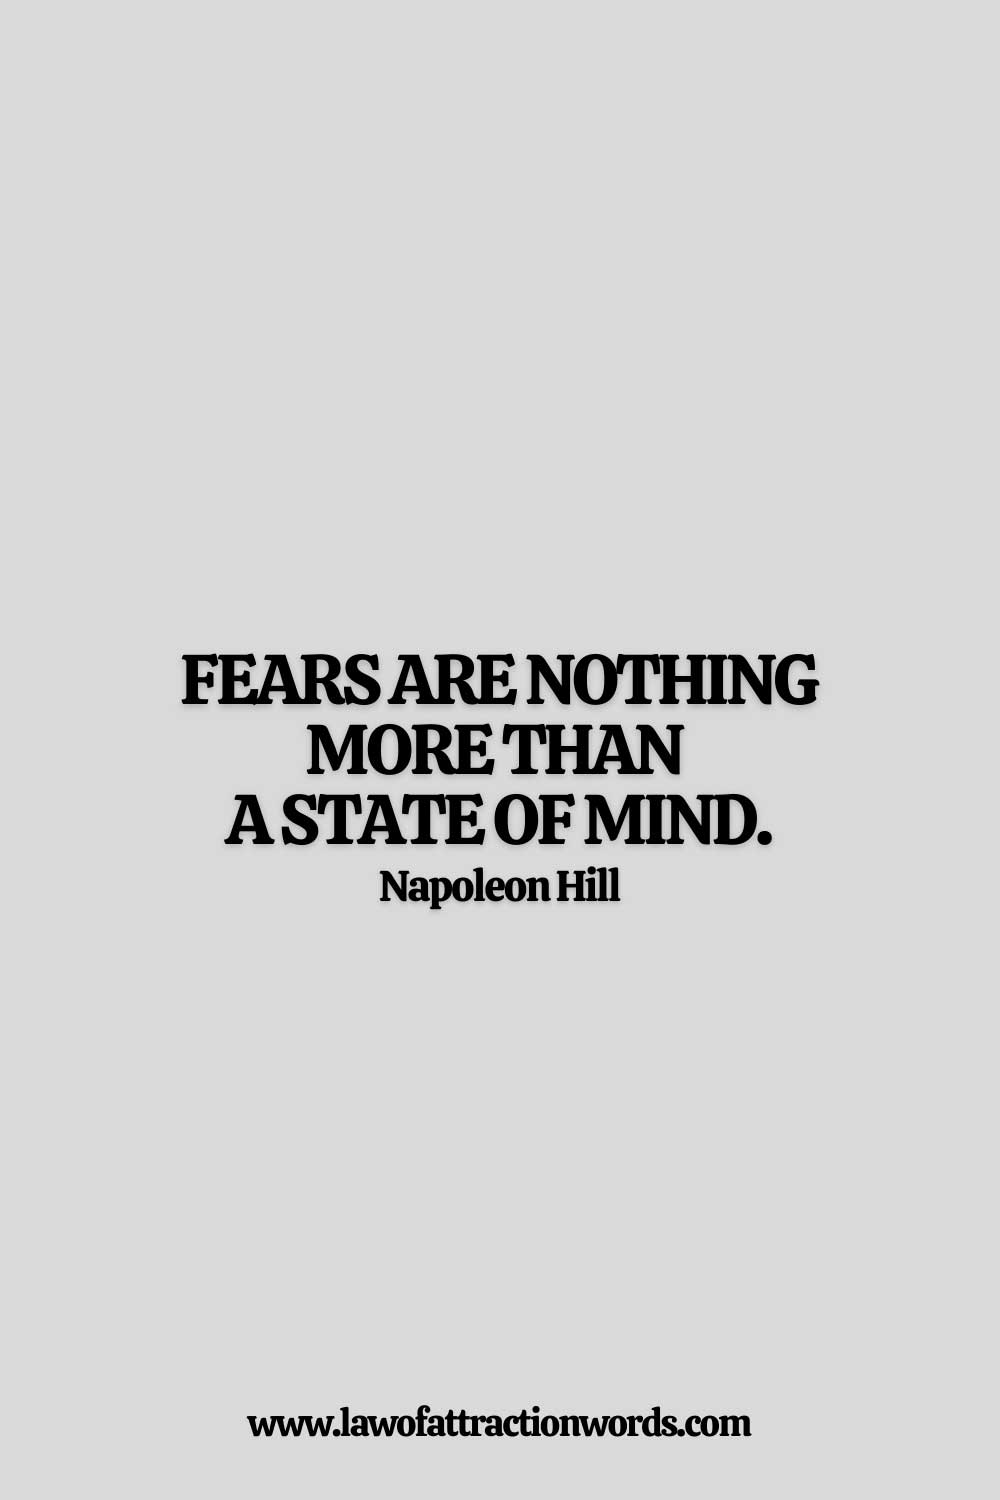 Short Quotes To Overcome Fear and Anxiety